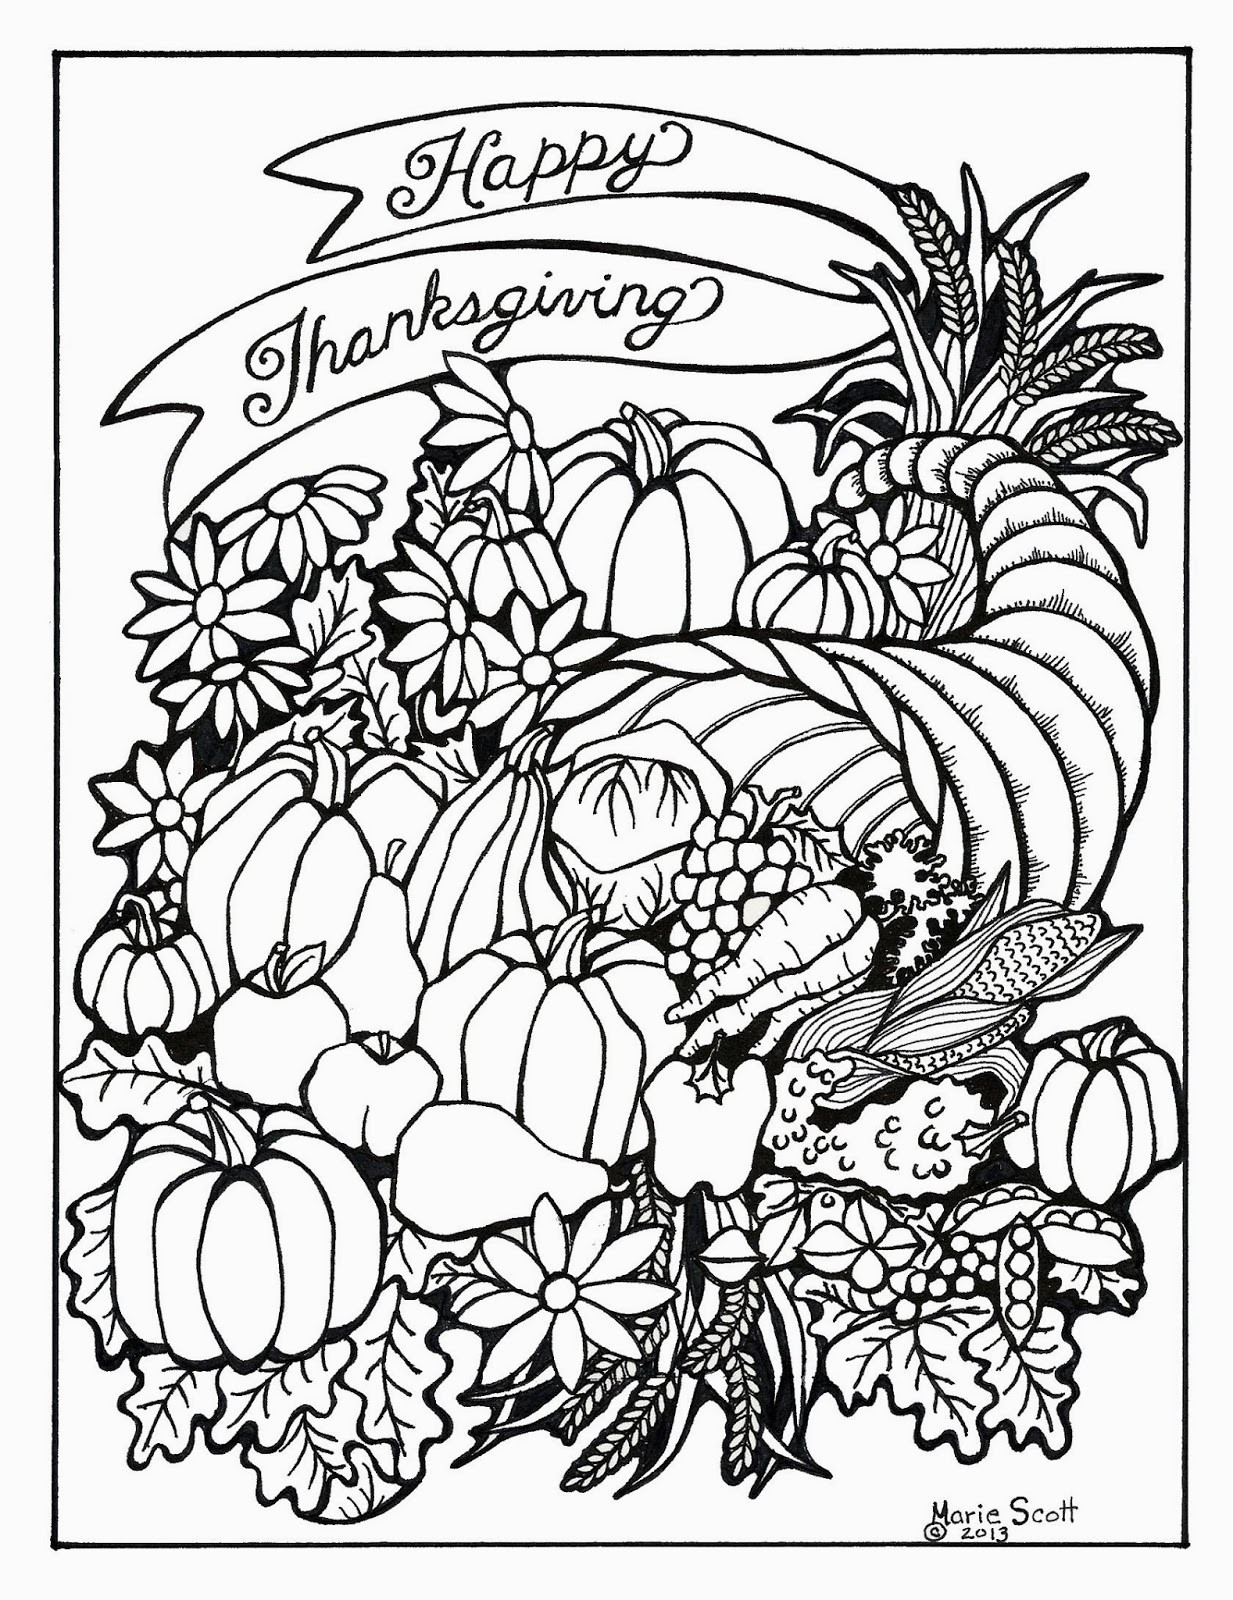 Thanksgiving Adult Coloring Pages
 Serendipity Hollow Thanksgiving Coloring Book Pages